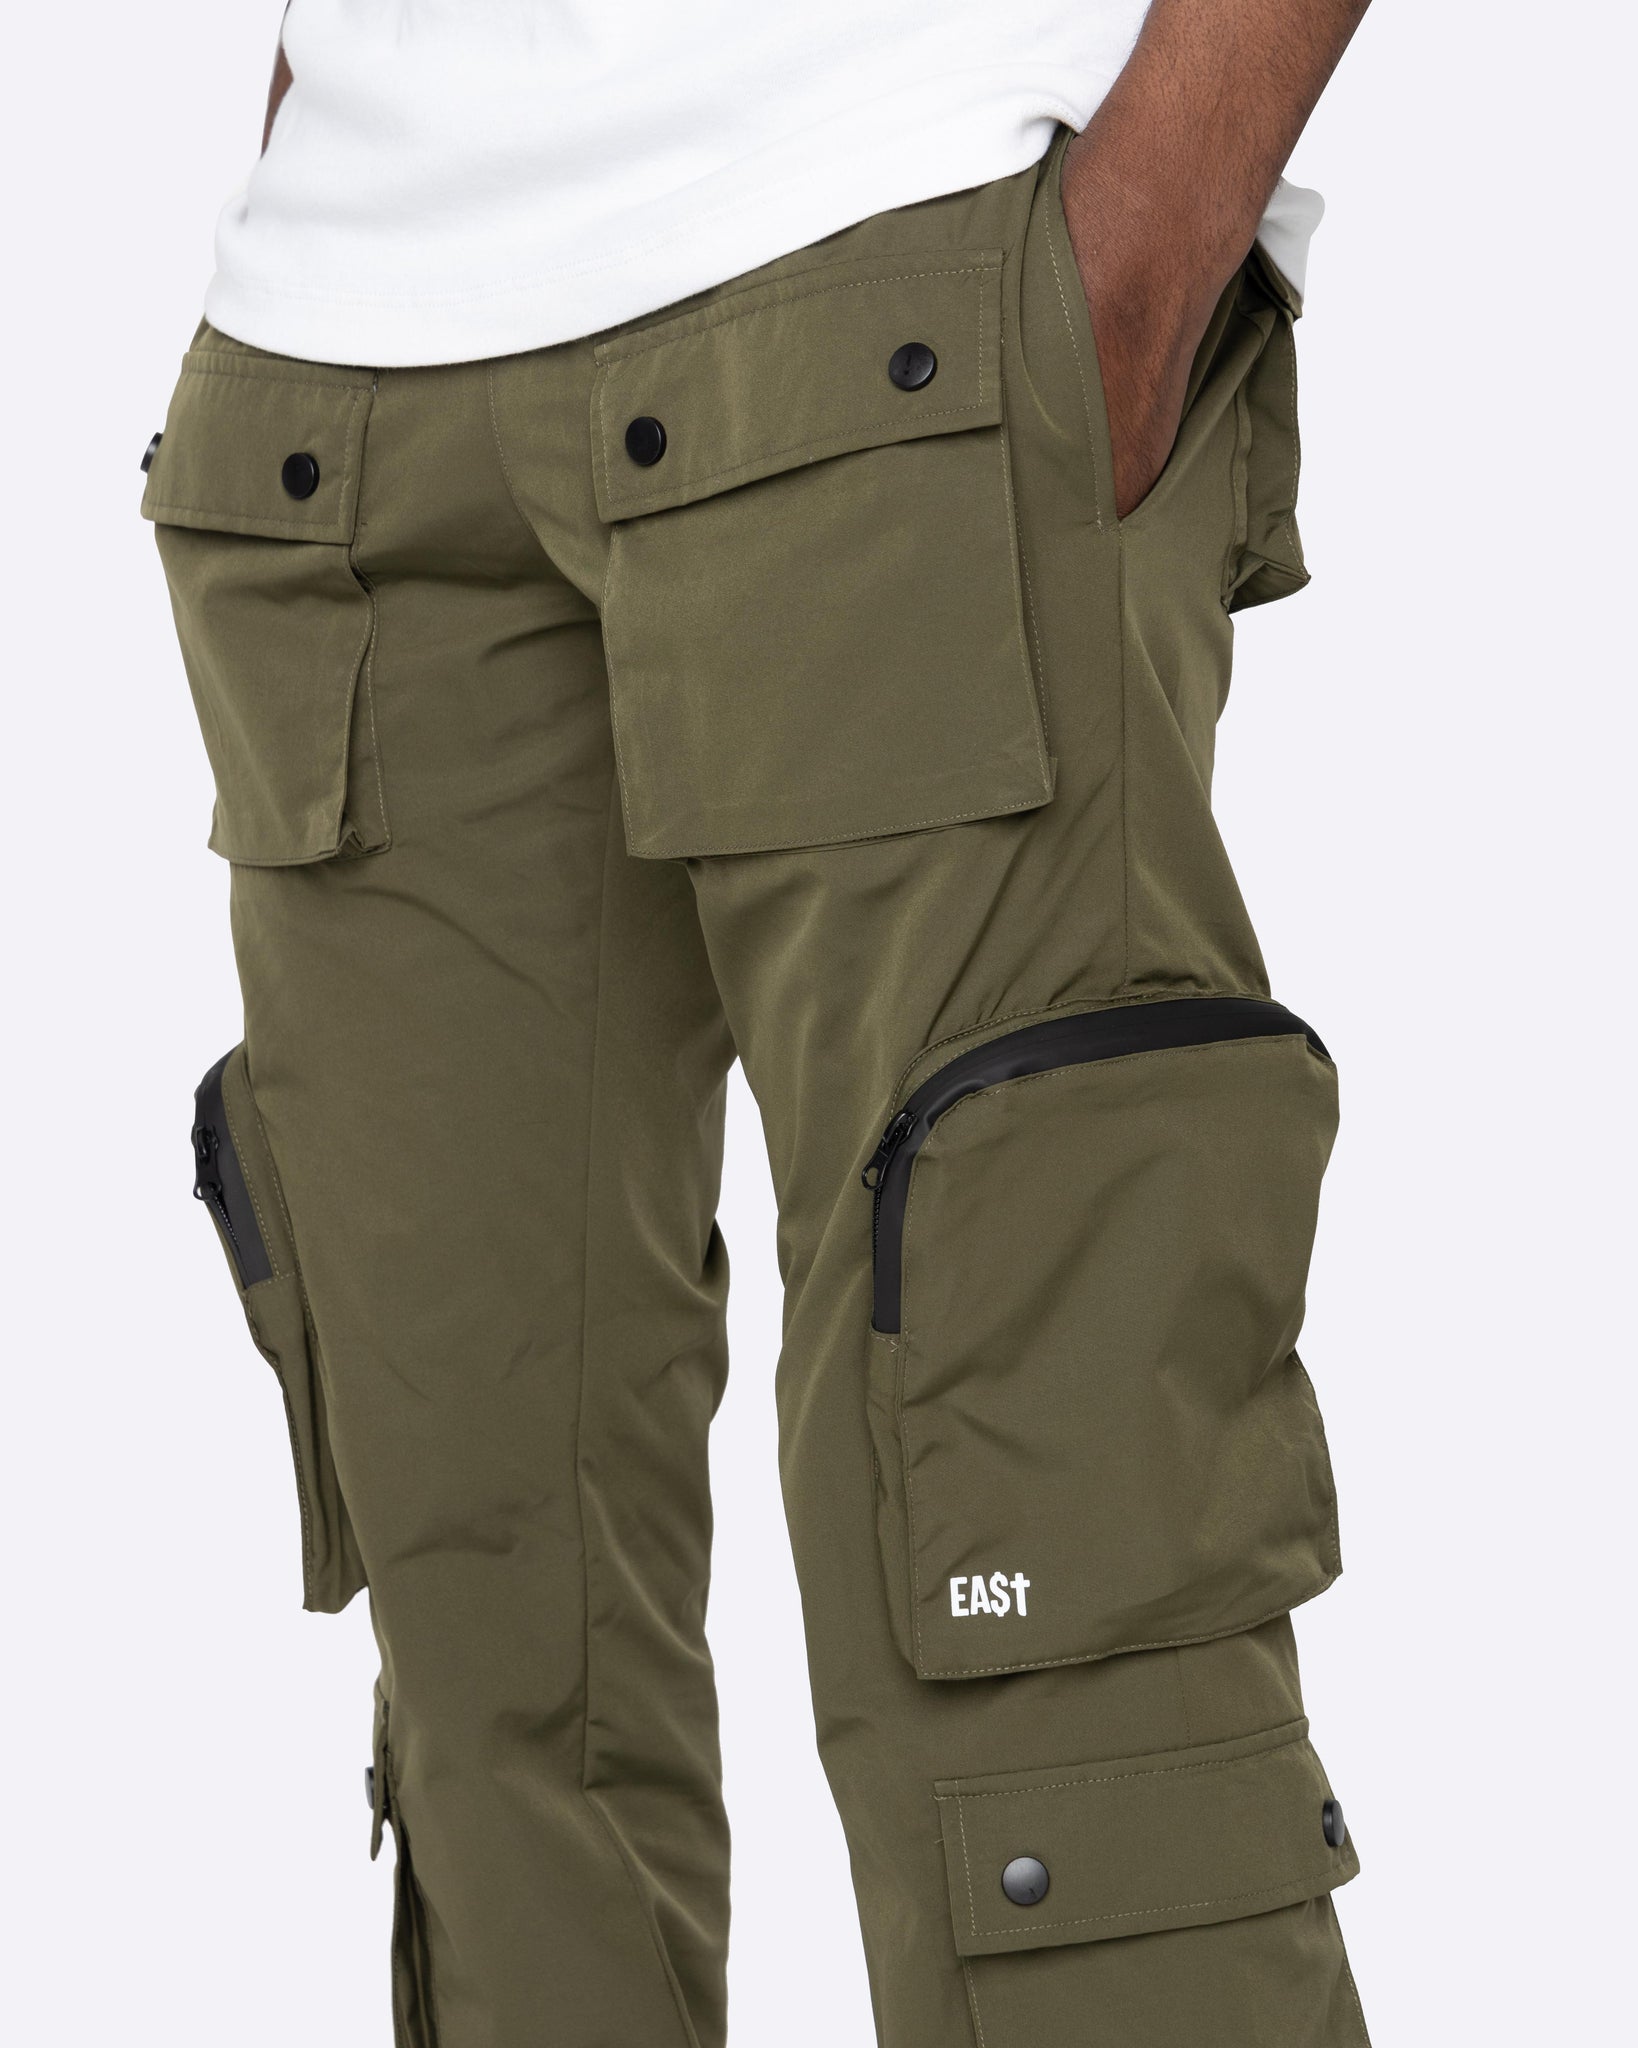 DAVE EAST "DOPE BOY" CARGOS-OLIVE